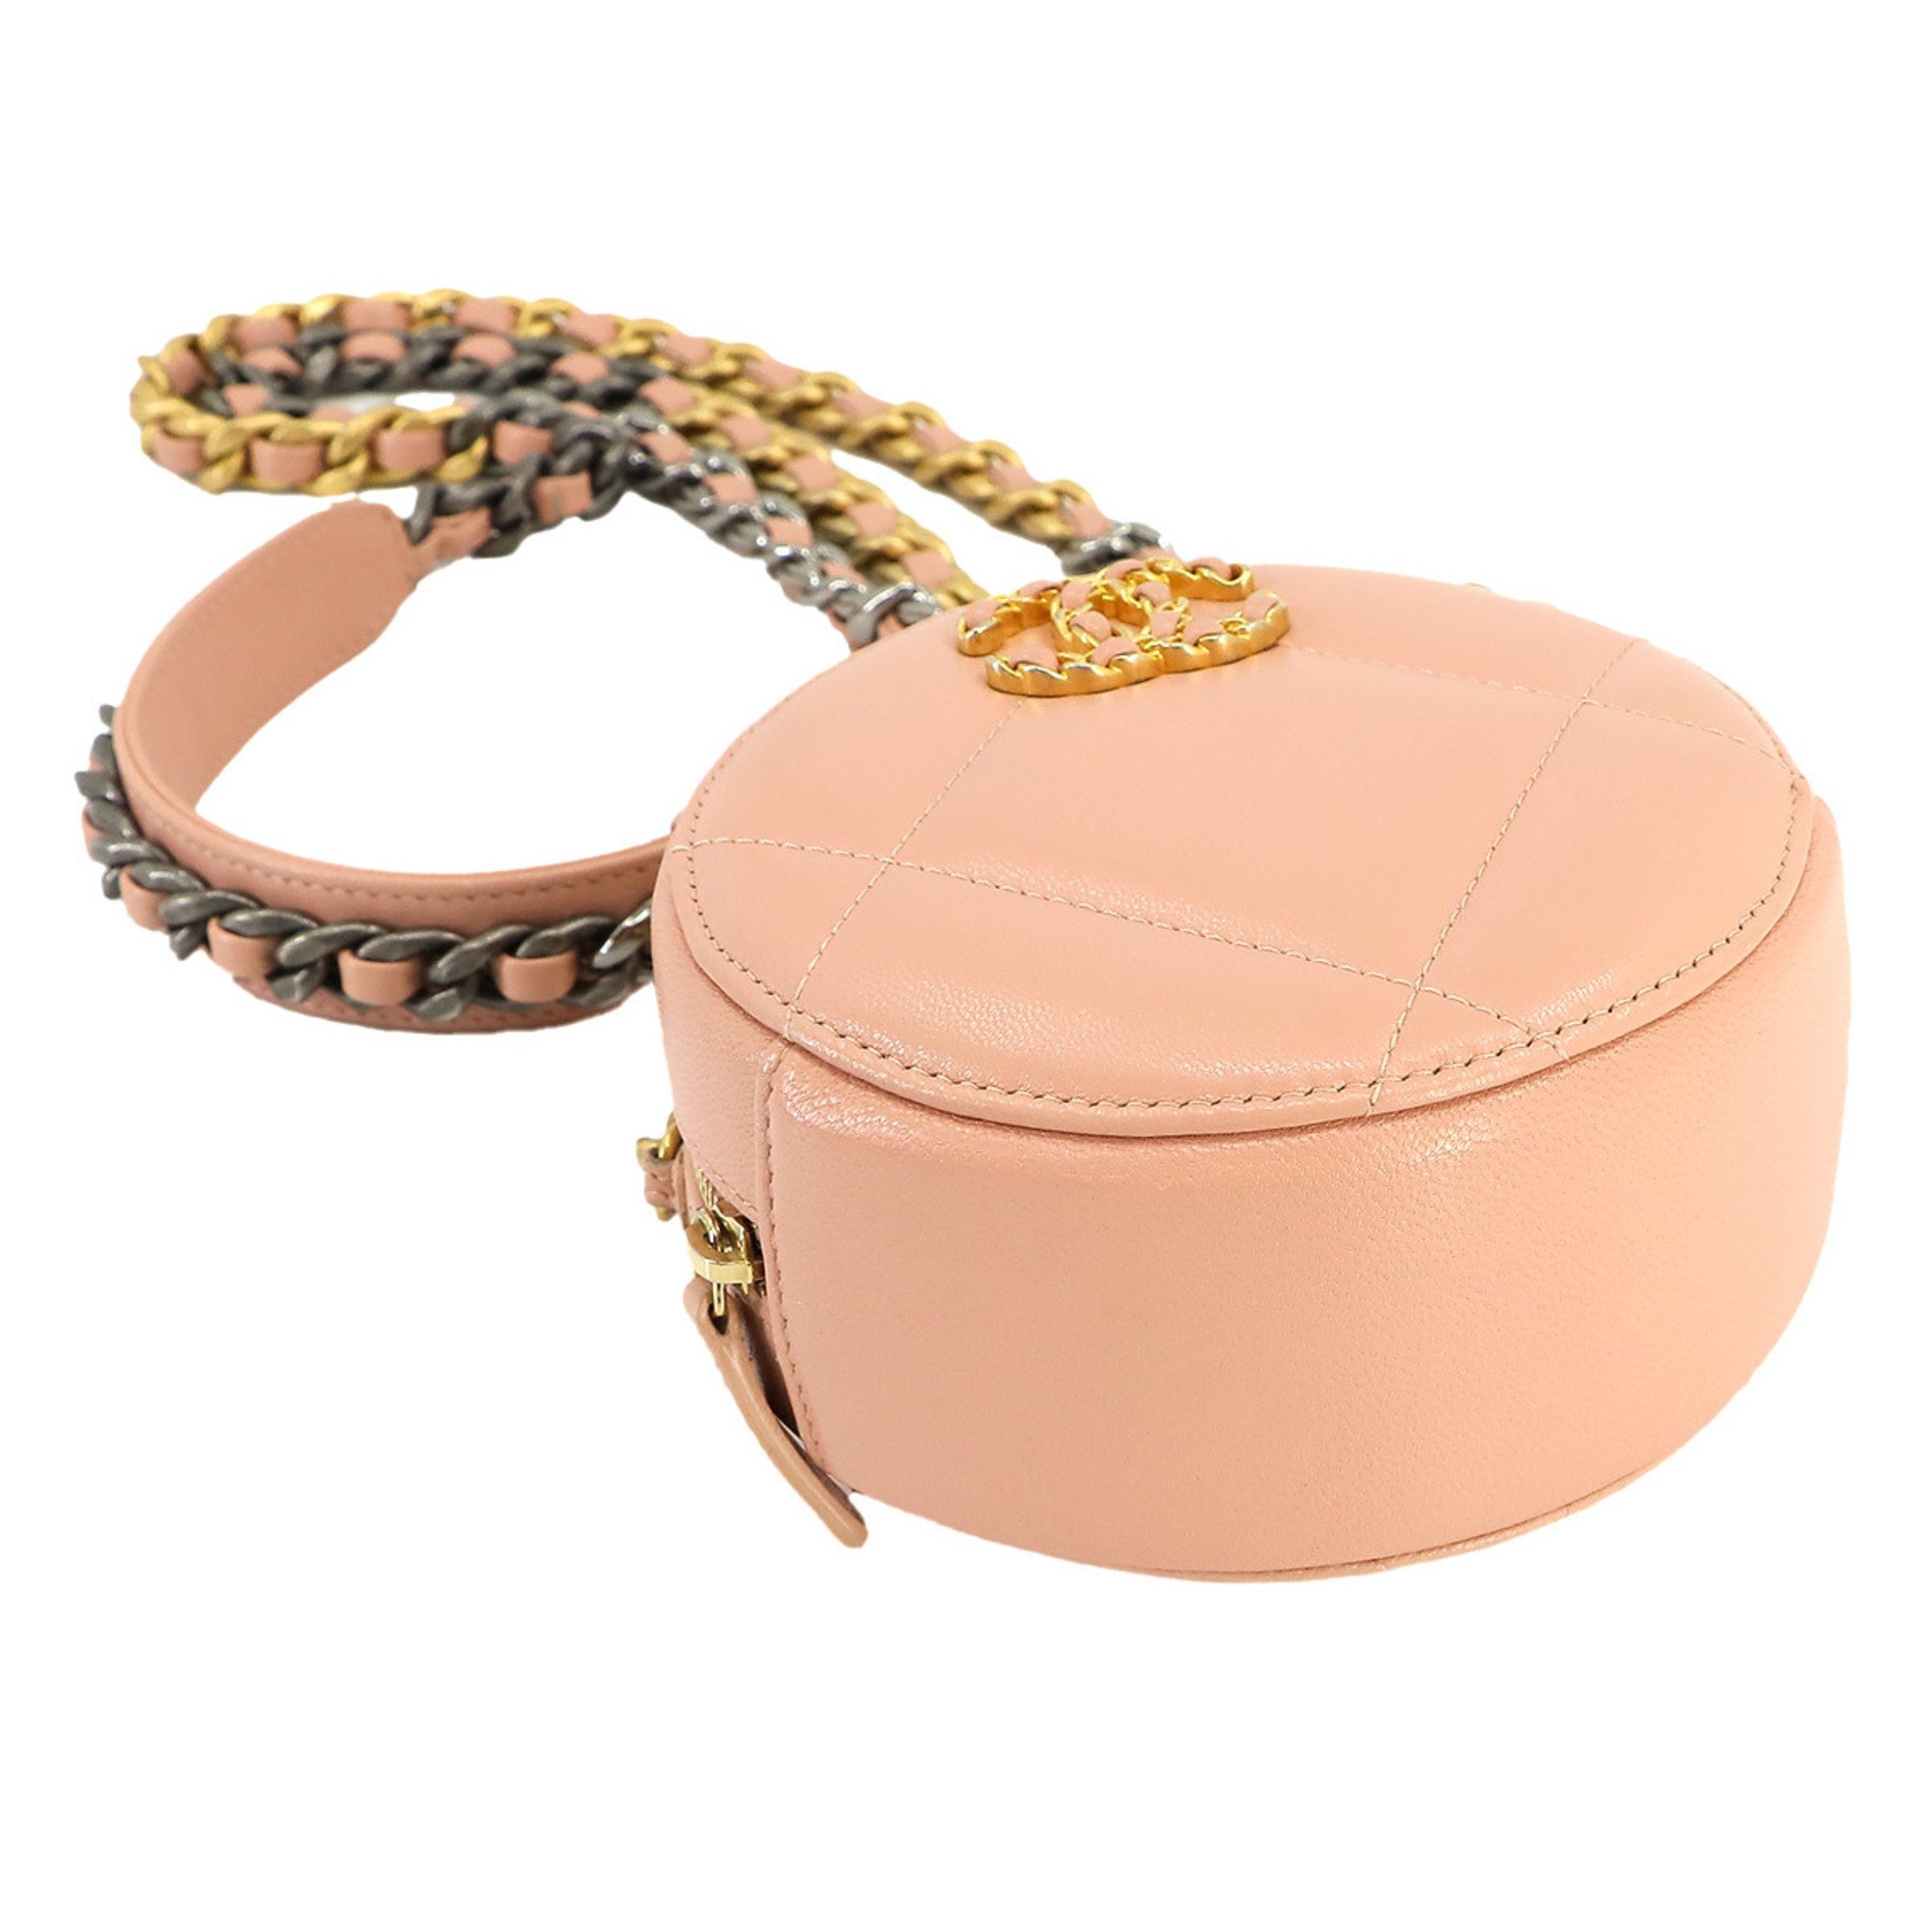 Chanel CHANEL 19 Round Clutch Chain Shoulder Bag Leather Pink AP0945